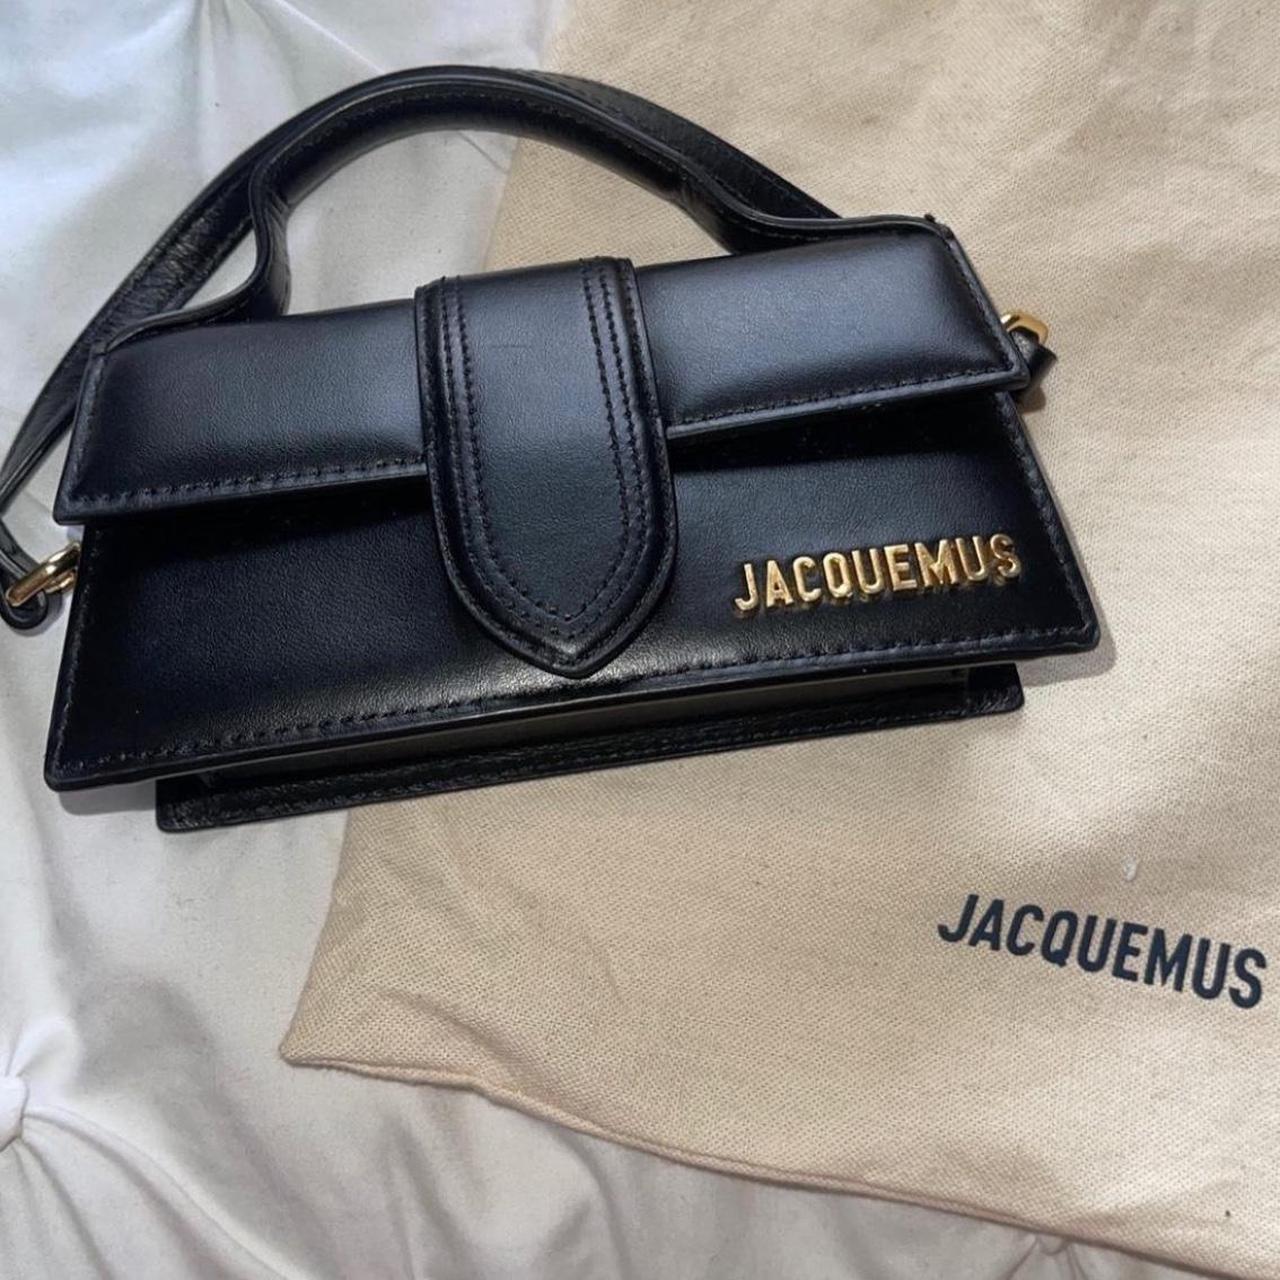 Jacquemus Le Bambino Black Leather Bag Crossbody and... - Depop